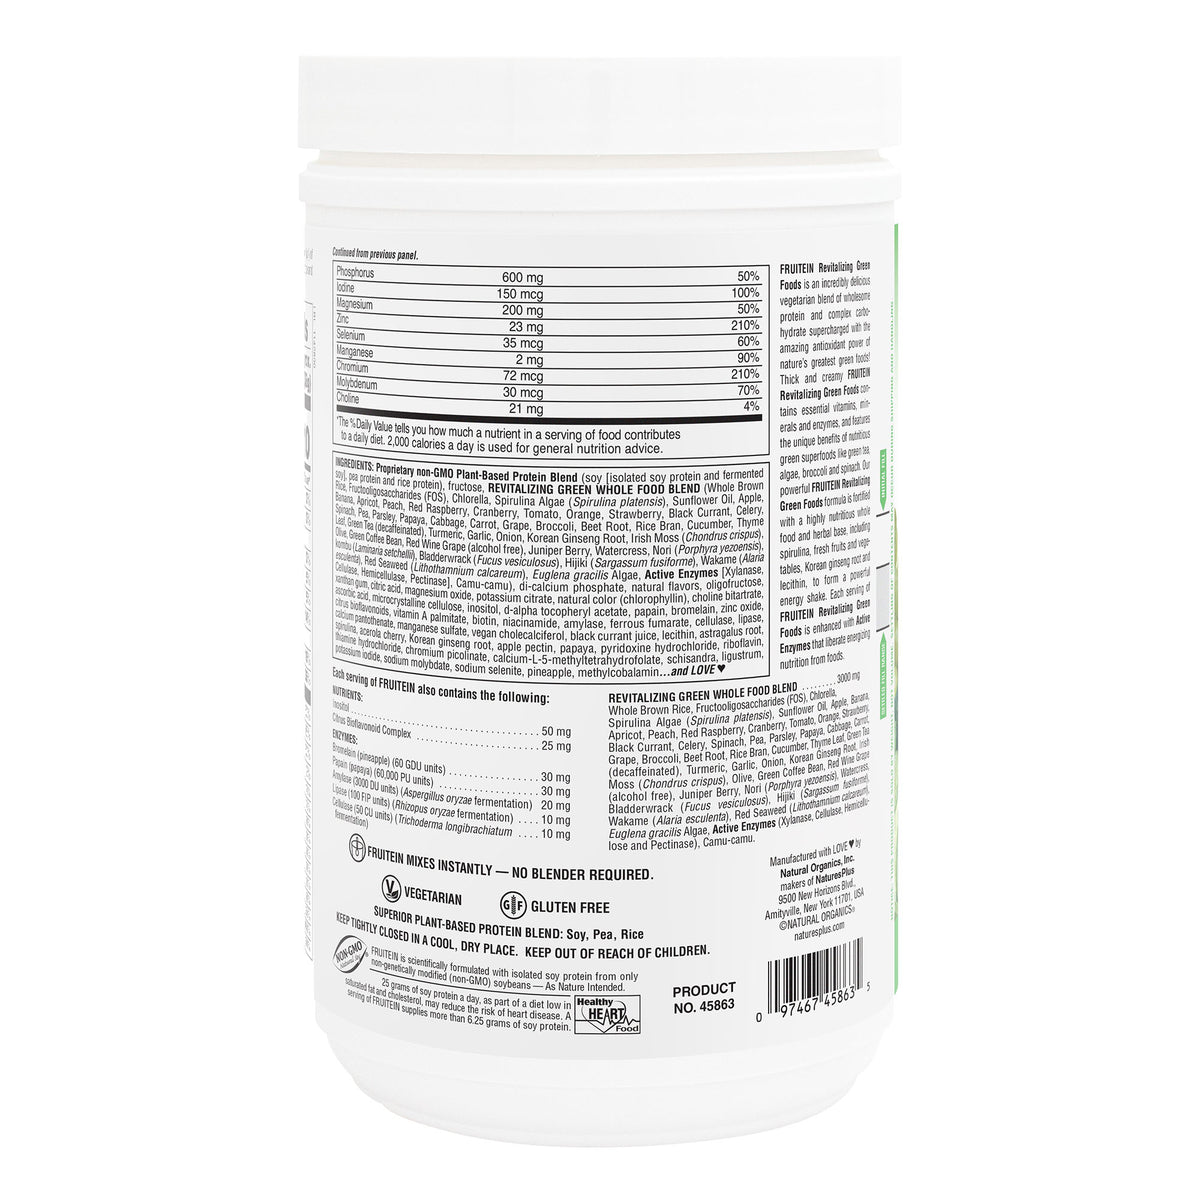 product image of FRUITEIN® Revitalizing Green Foods Shake containing 1.30 LB